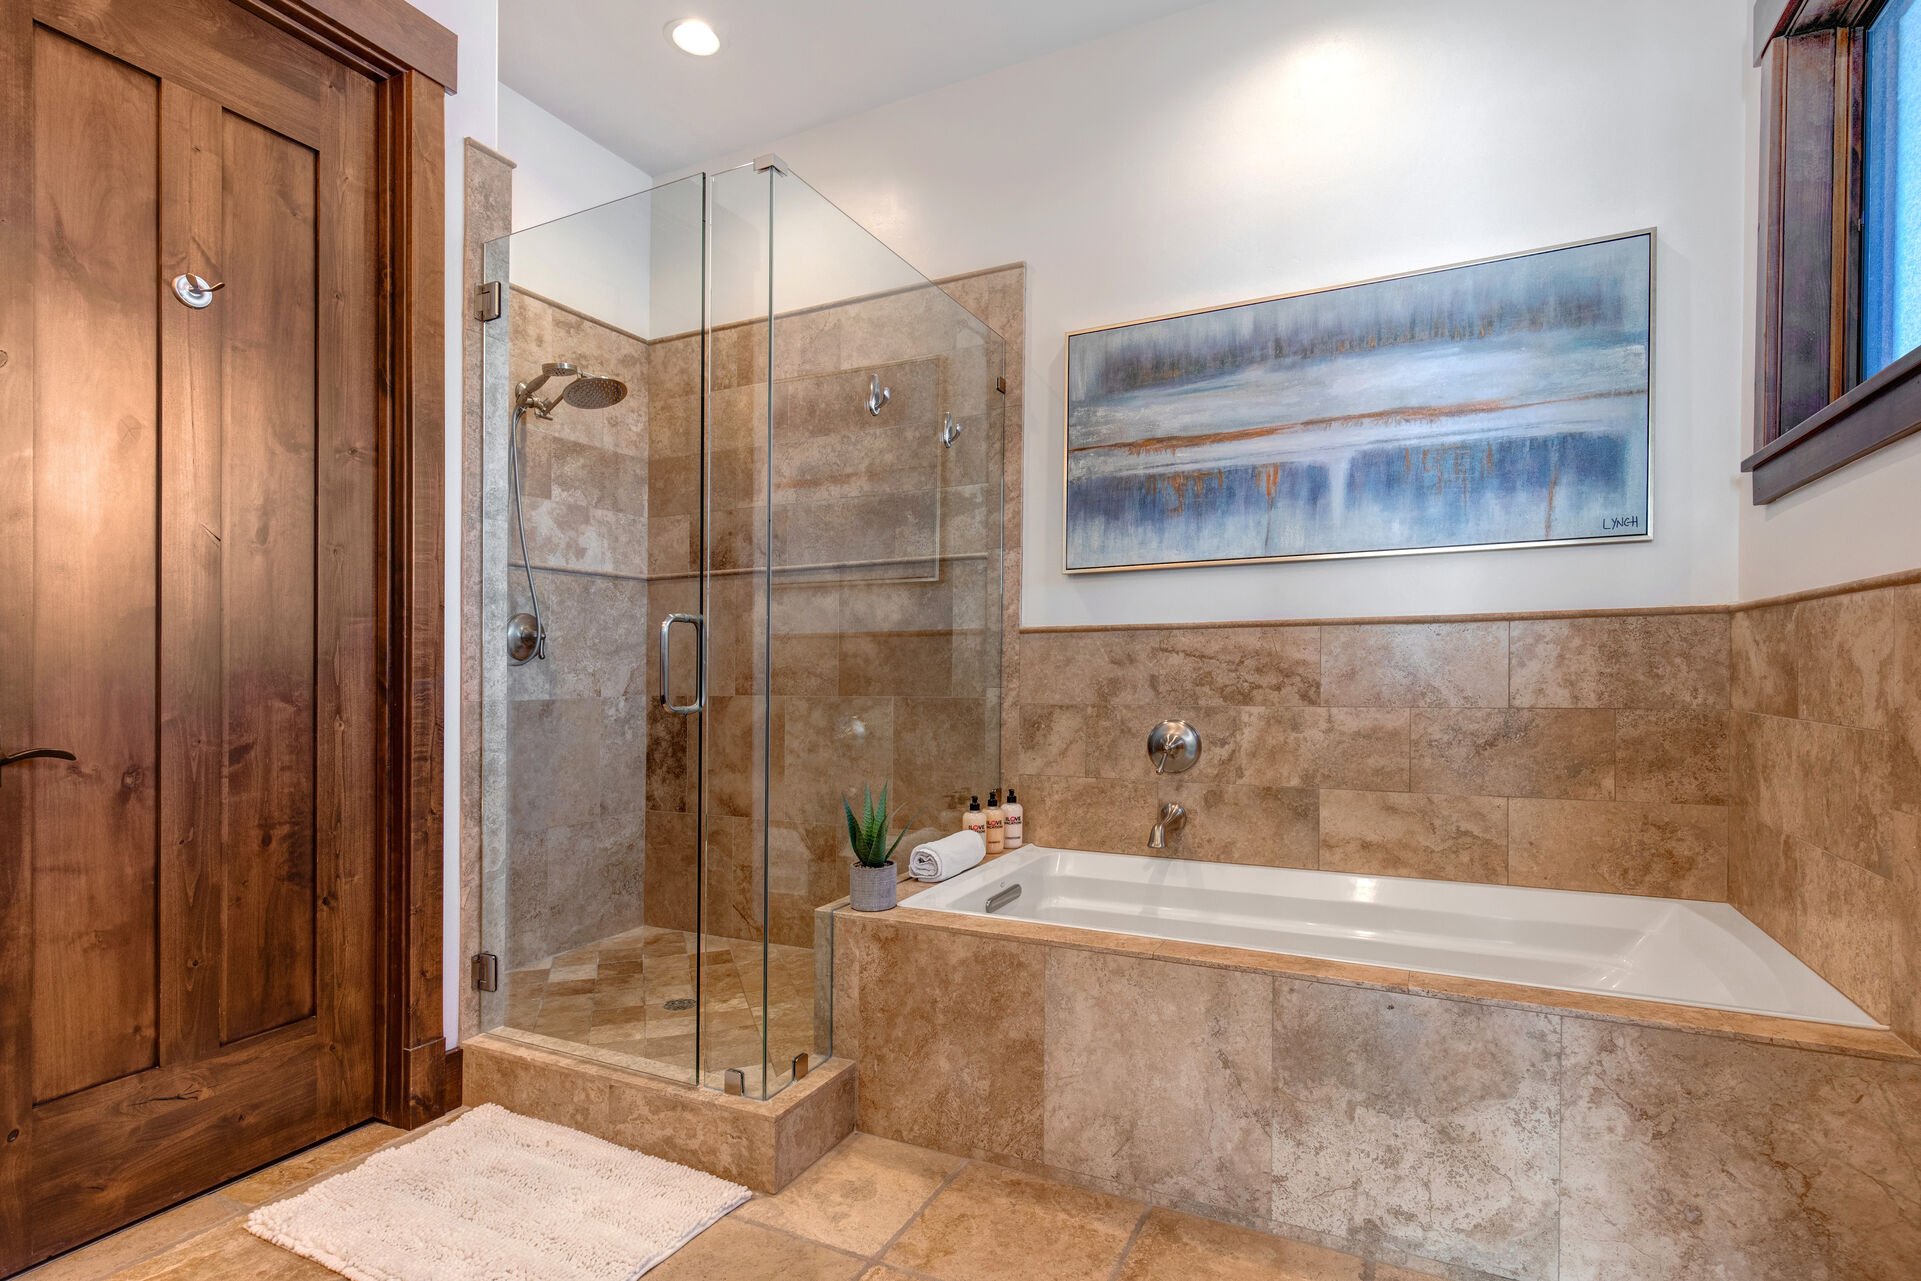 The grand master bath offers dual stone counters sinks, a large tile and glass shower, and jetted soaking tub